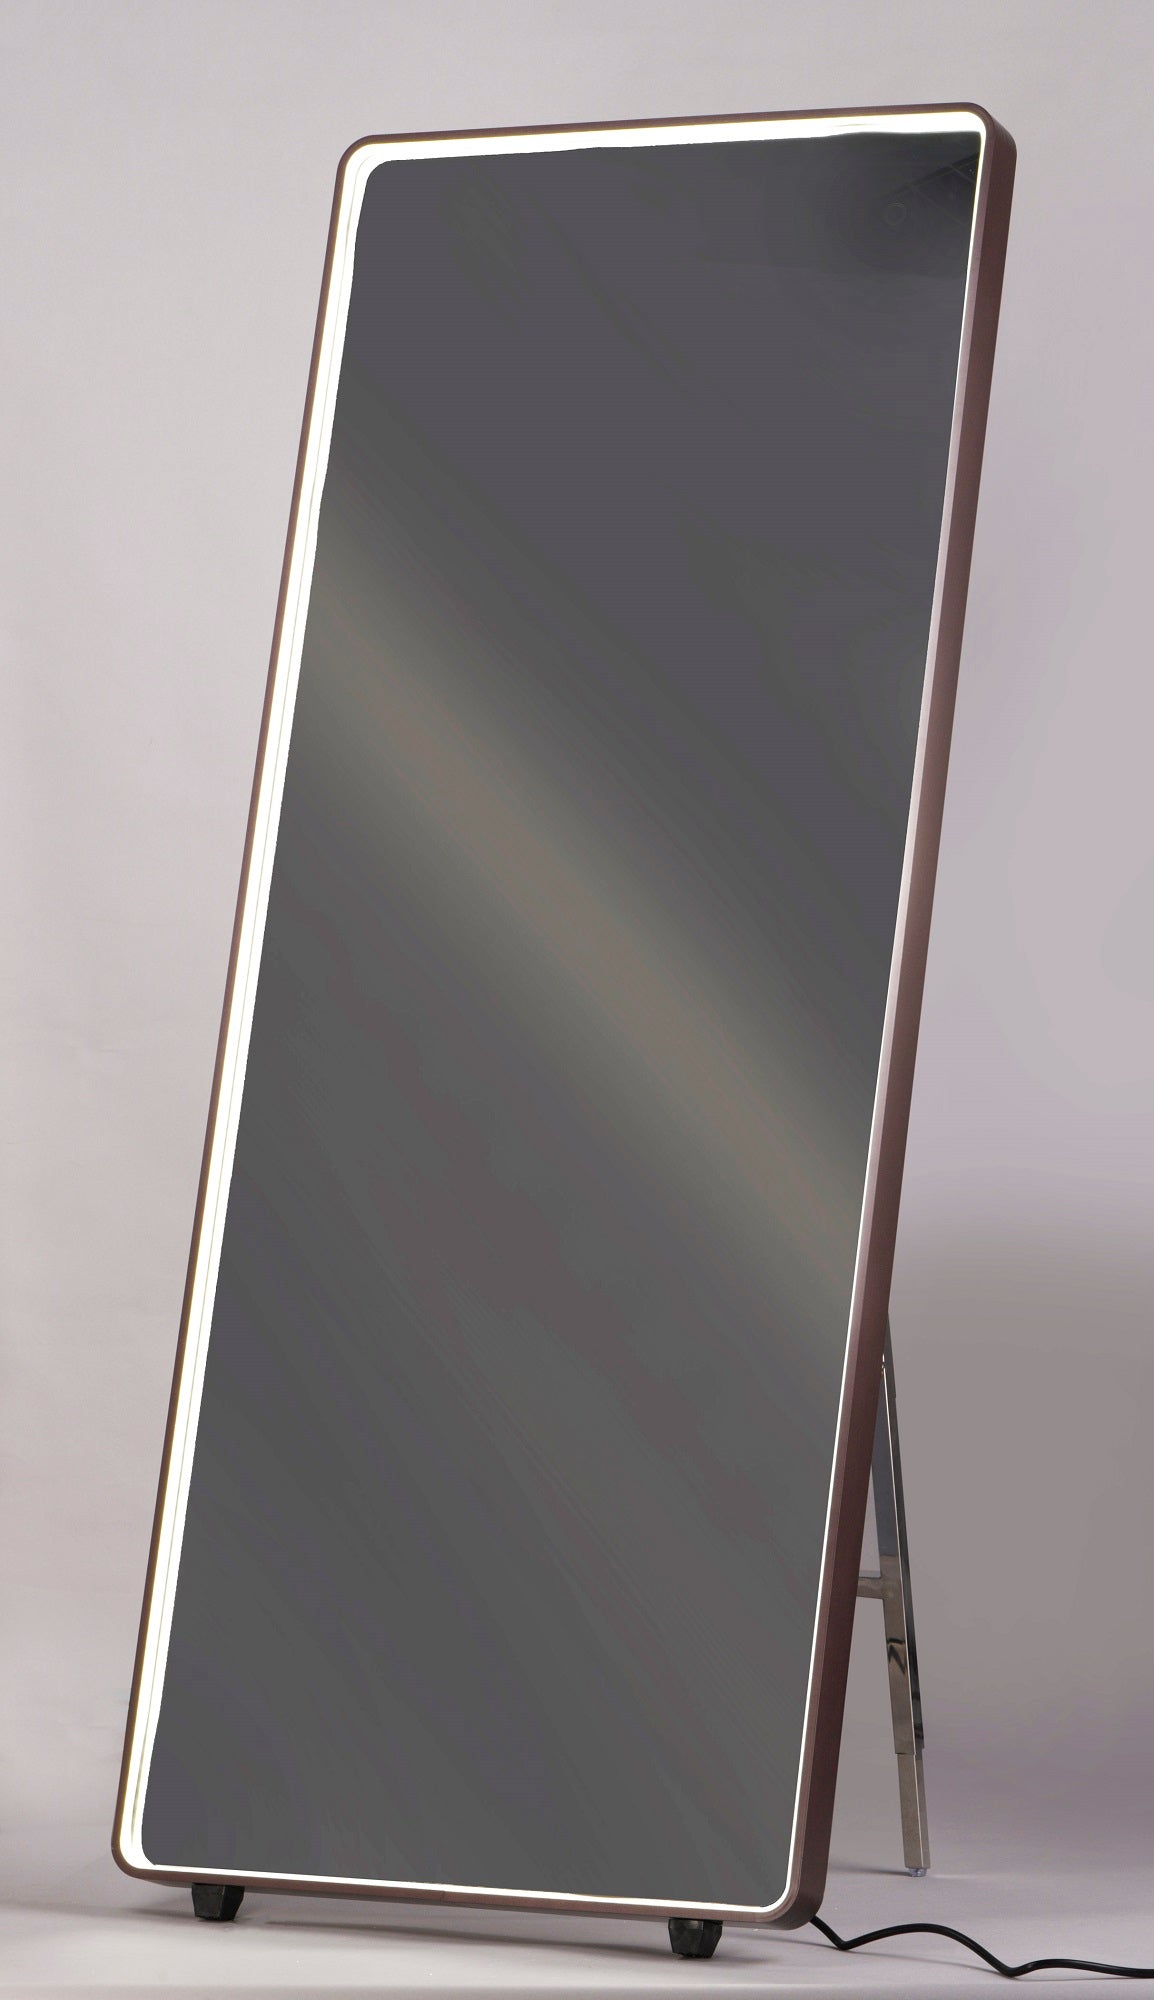 LED Free Standing Mirror